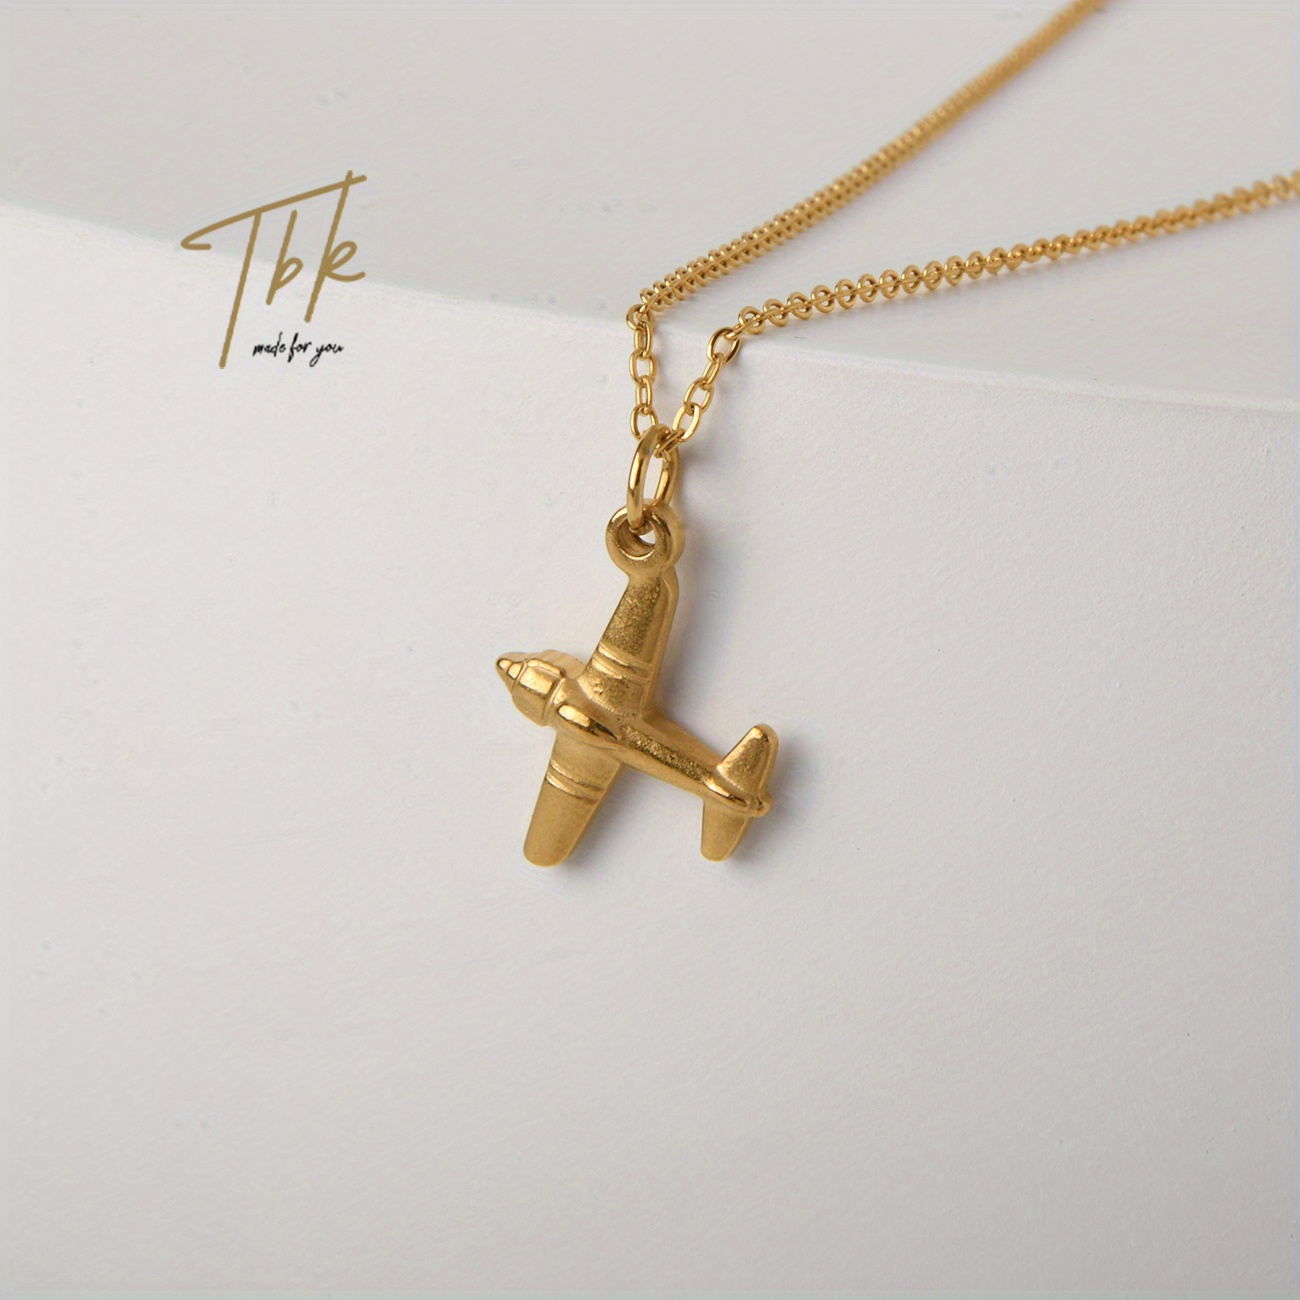 Sparkling Airplane Necklace  Airplane necklace, Necklace, Gold